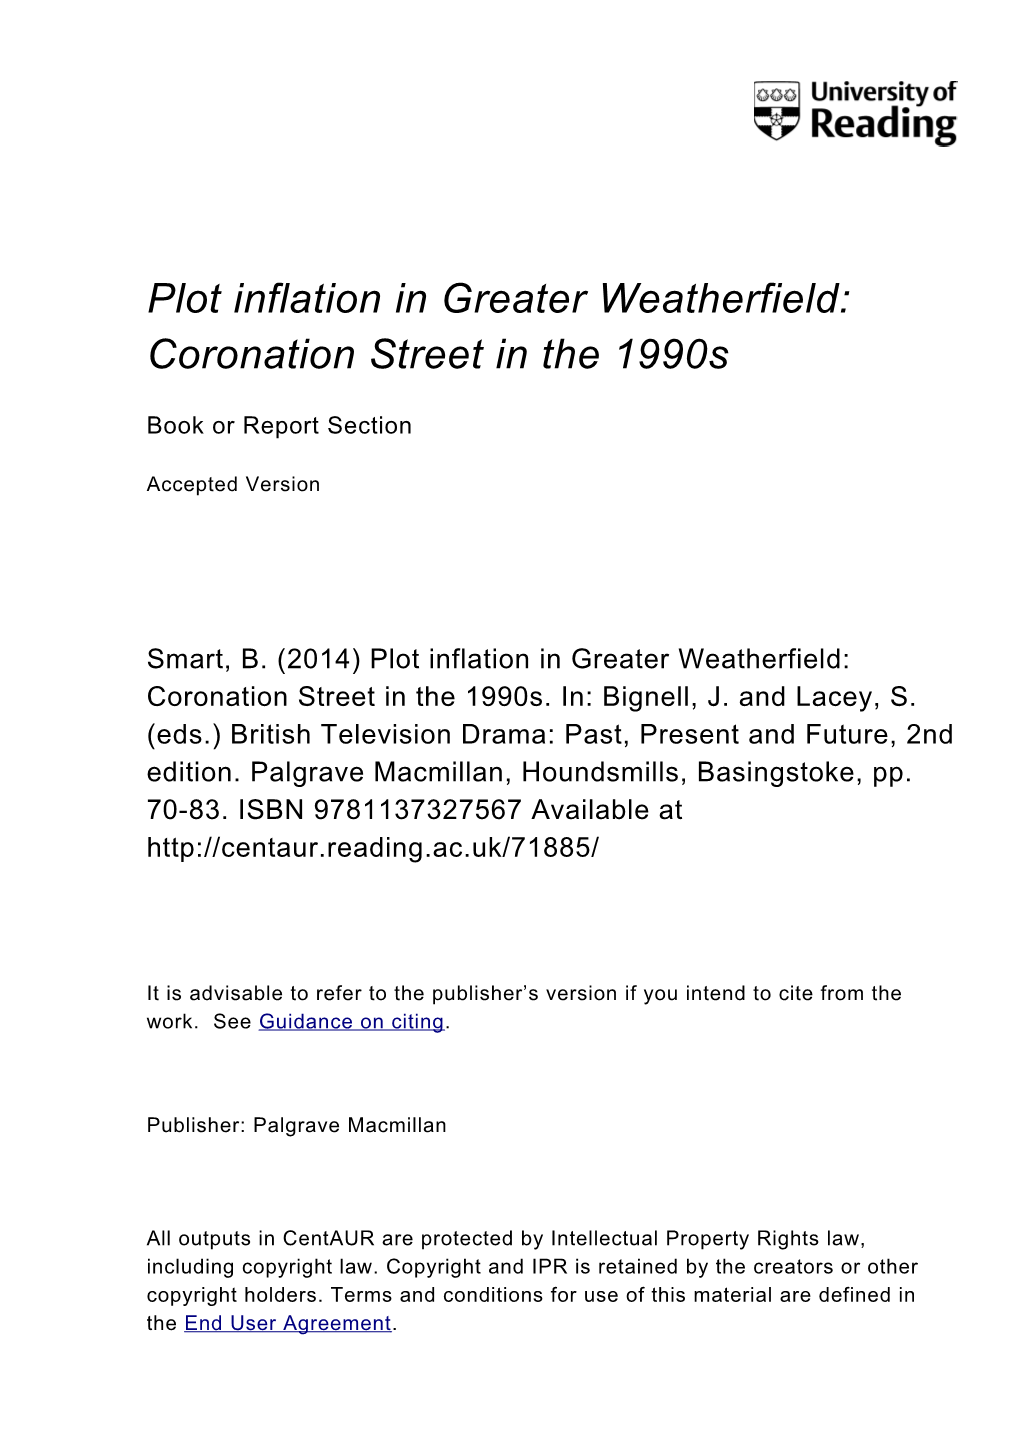 Plot Inflation in Greater Weatherfield: Coronation Street in the 1990S